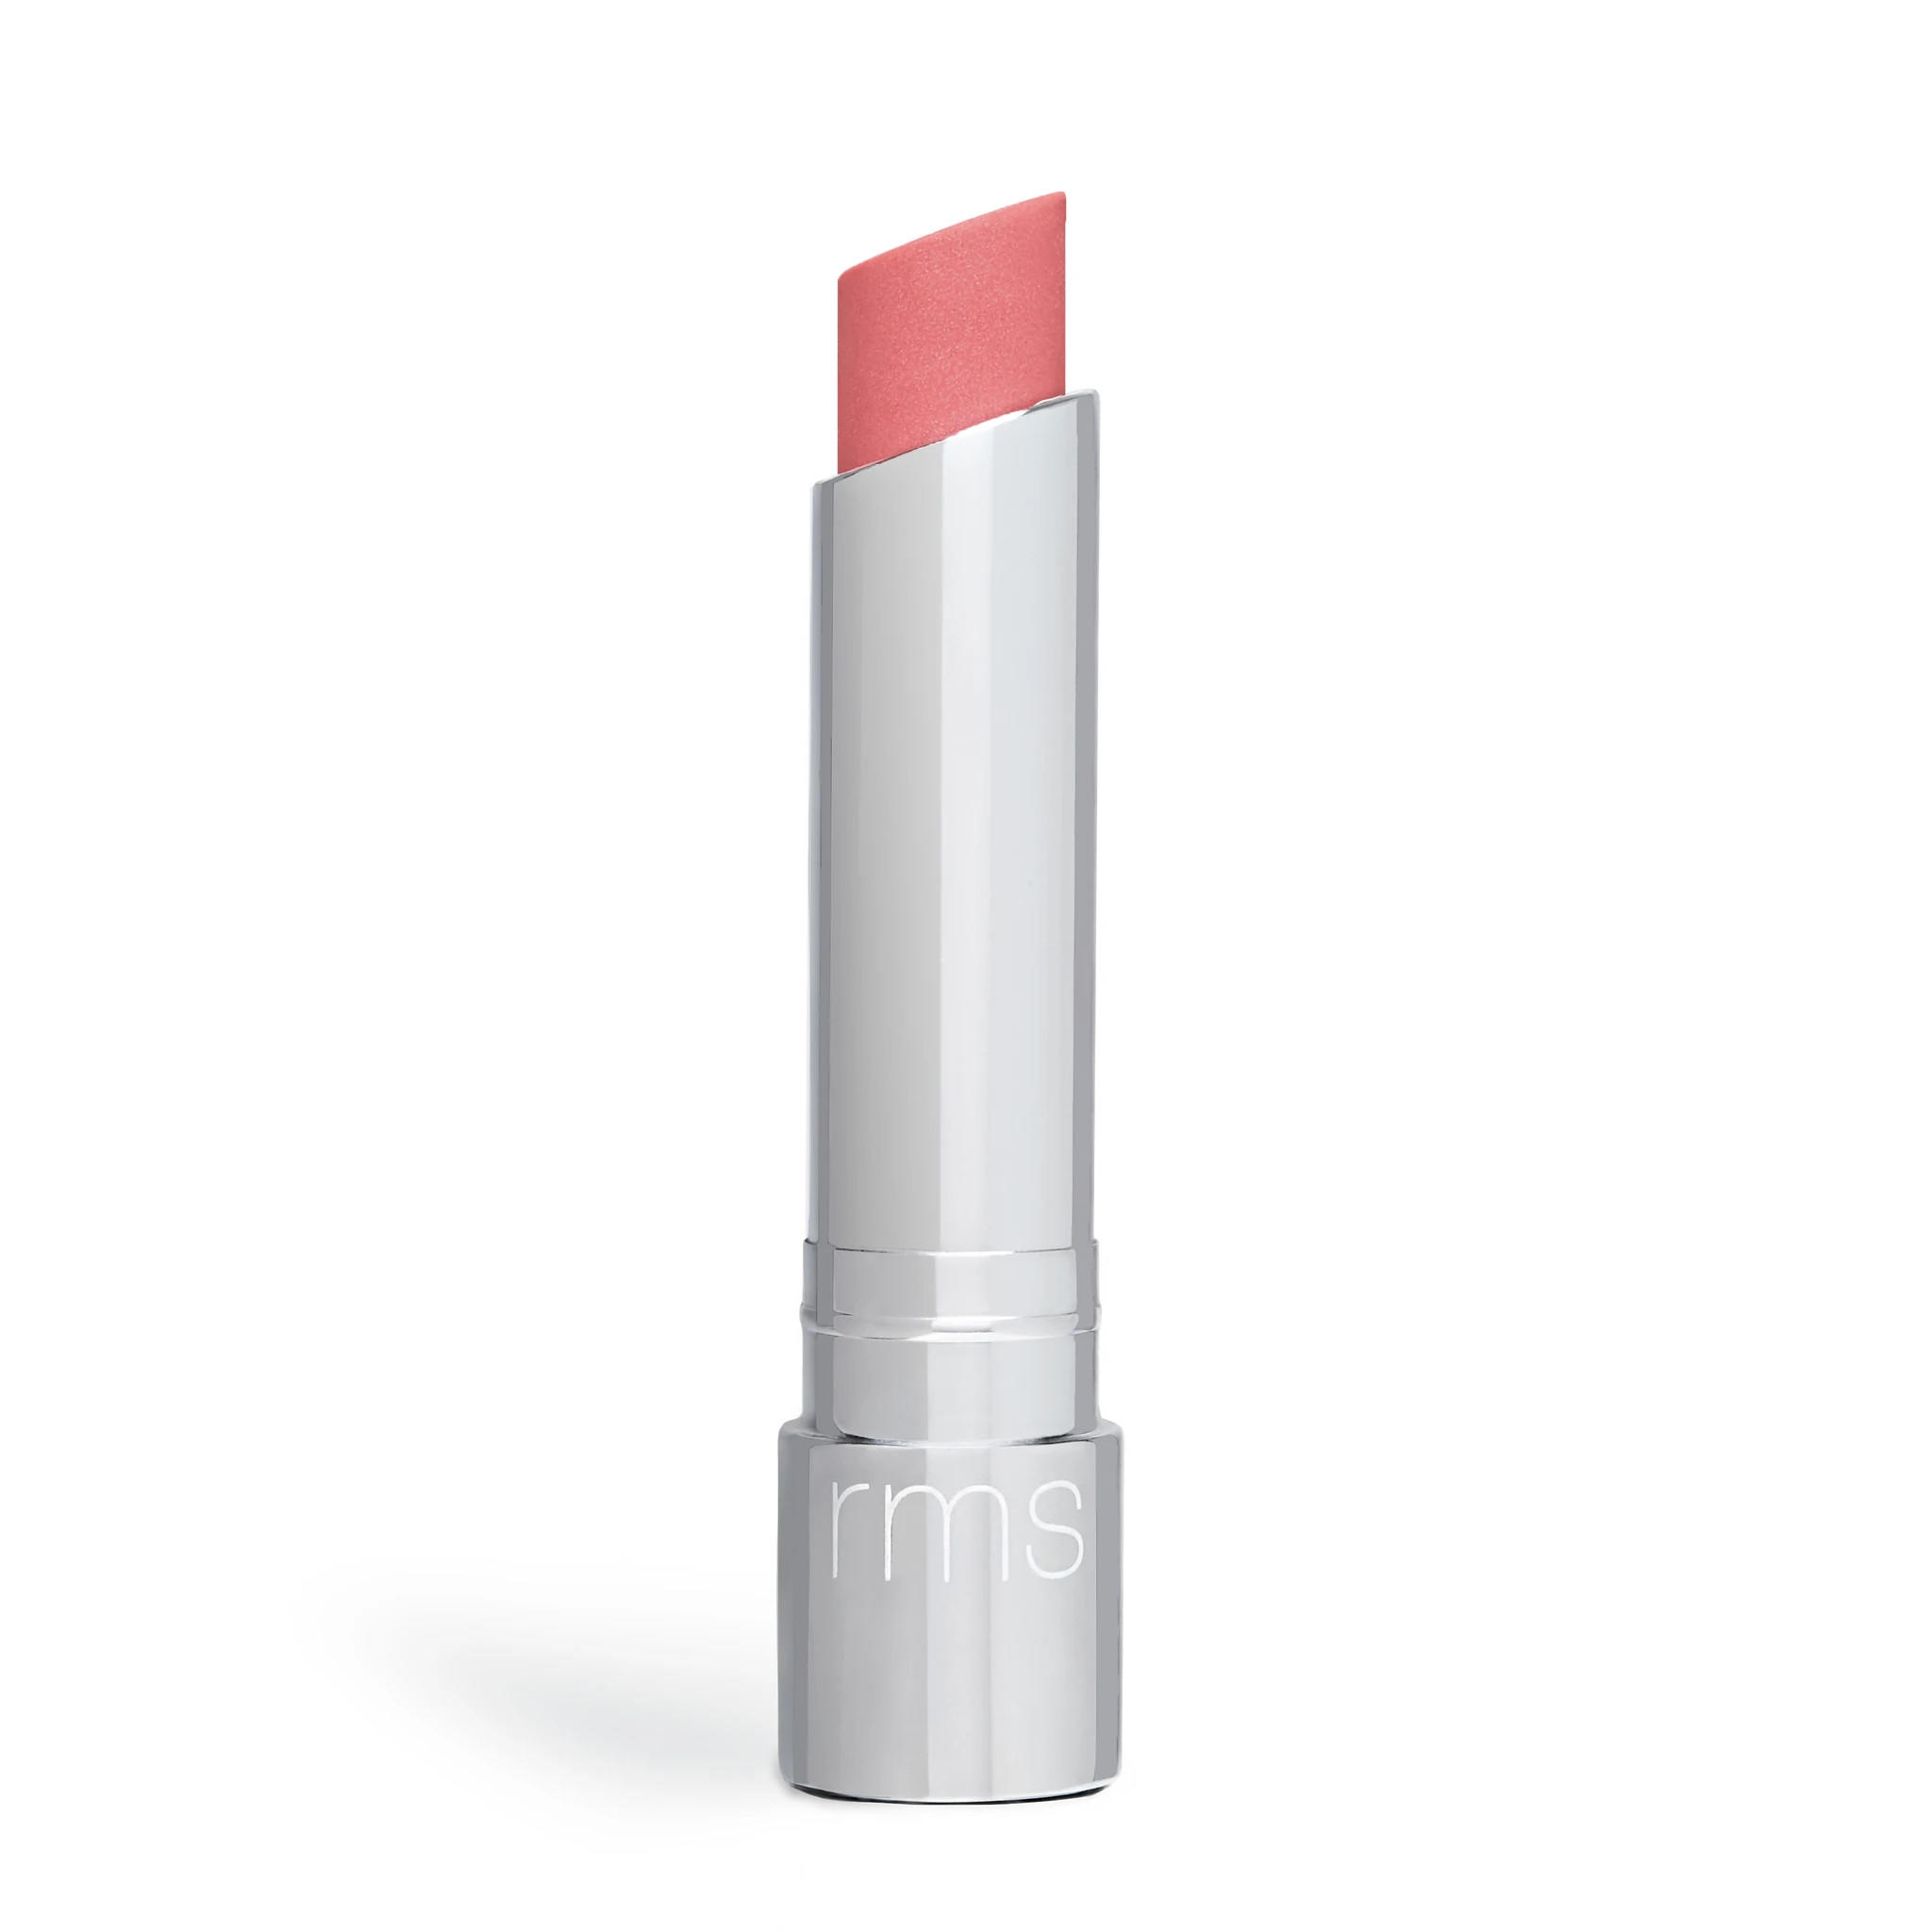 RMS Beauty Tinted Daily Lip Balm Passion Lane